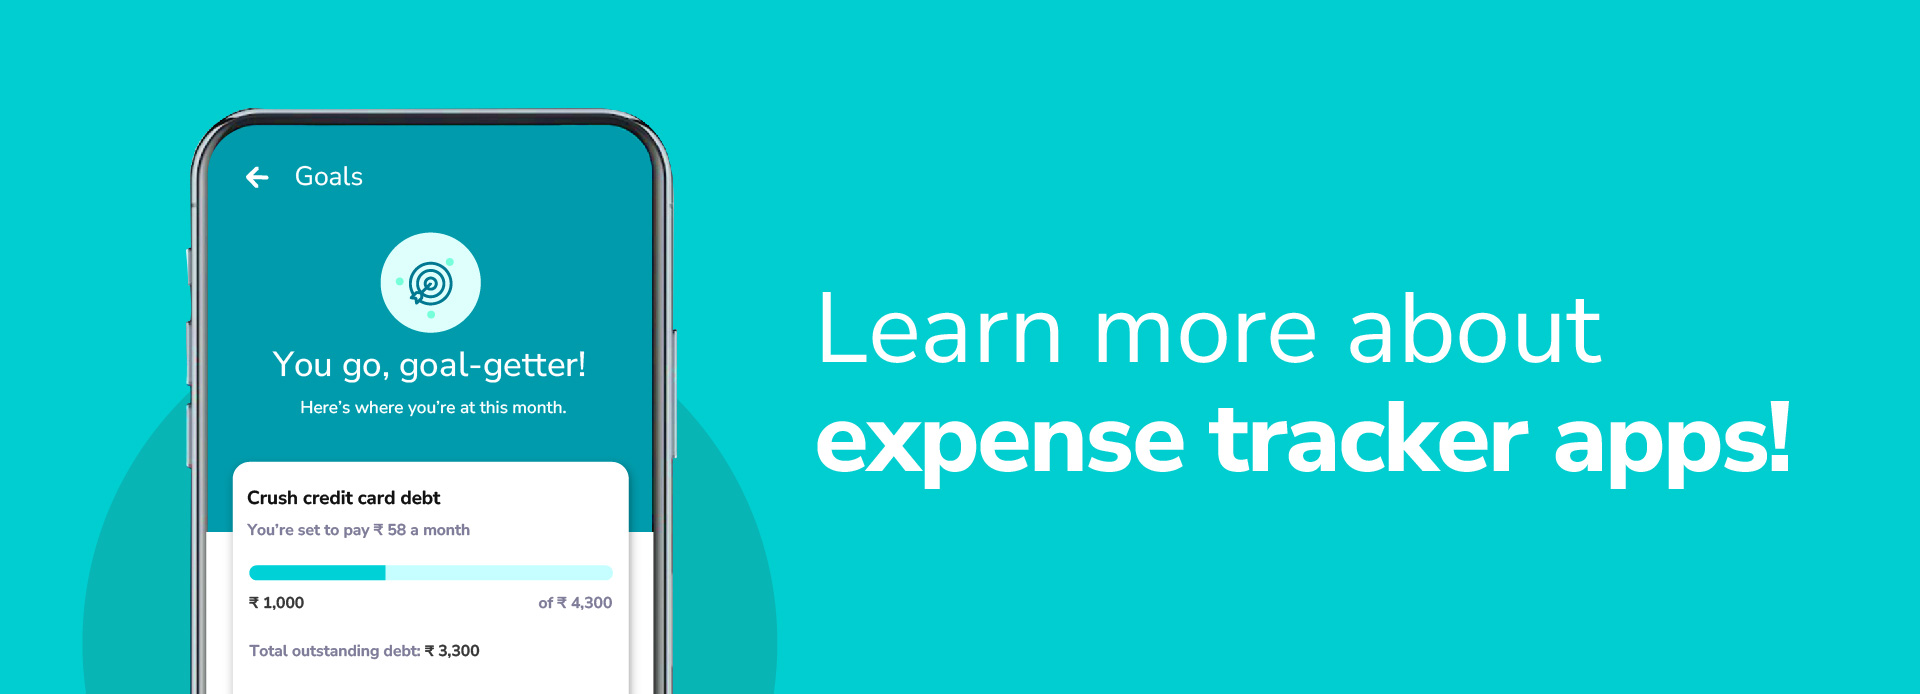 Learn more about expense tracker apps